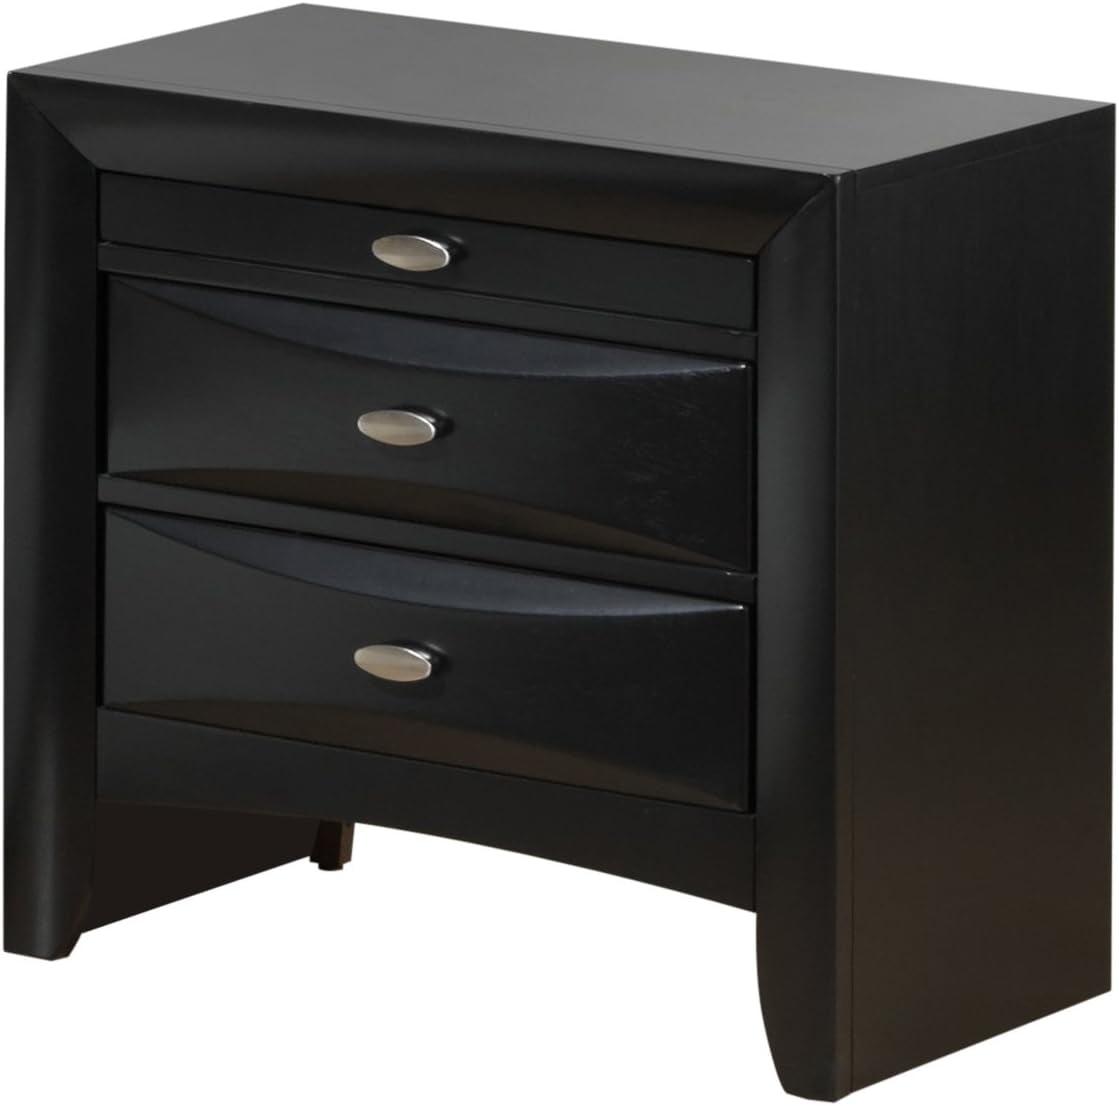 Linda Black Contemporary 3-Drawer Nightstand with Metal Knobs